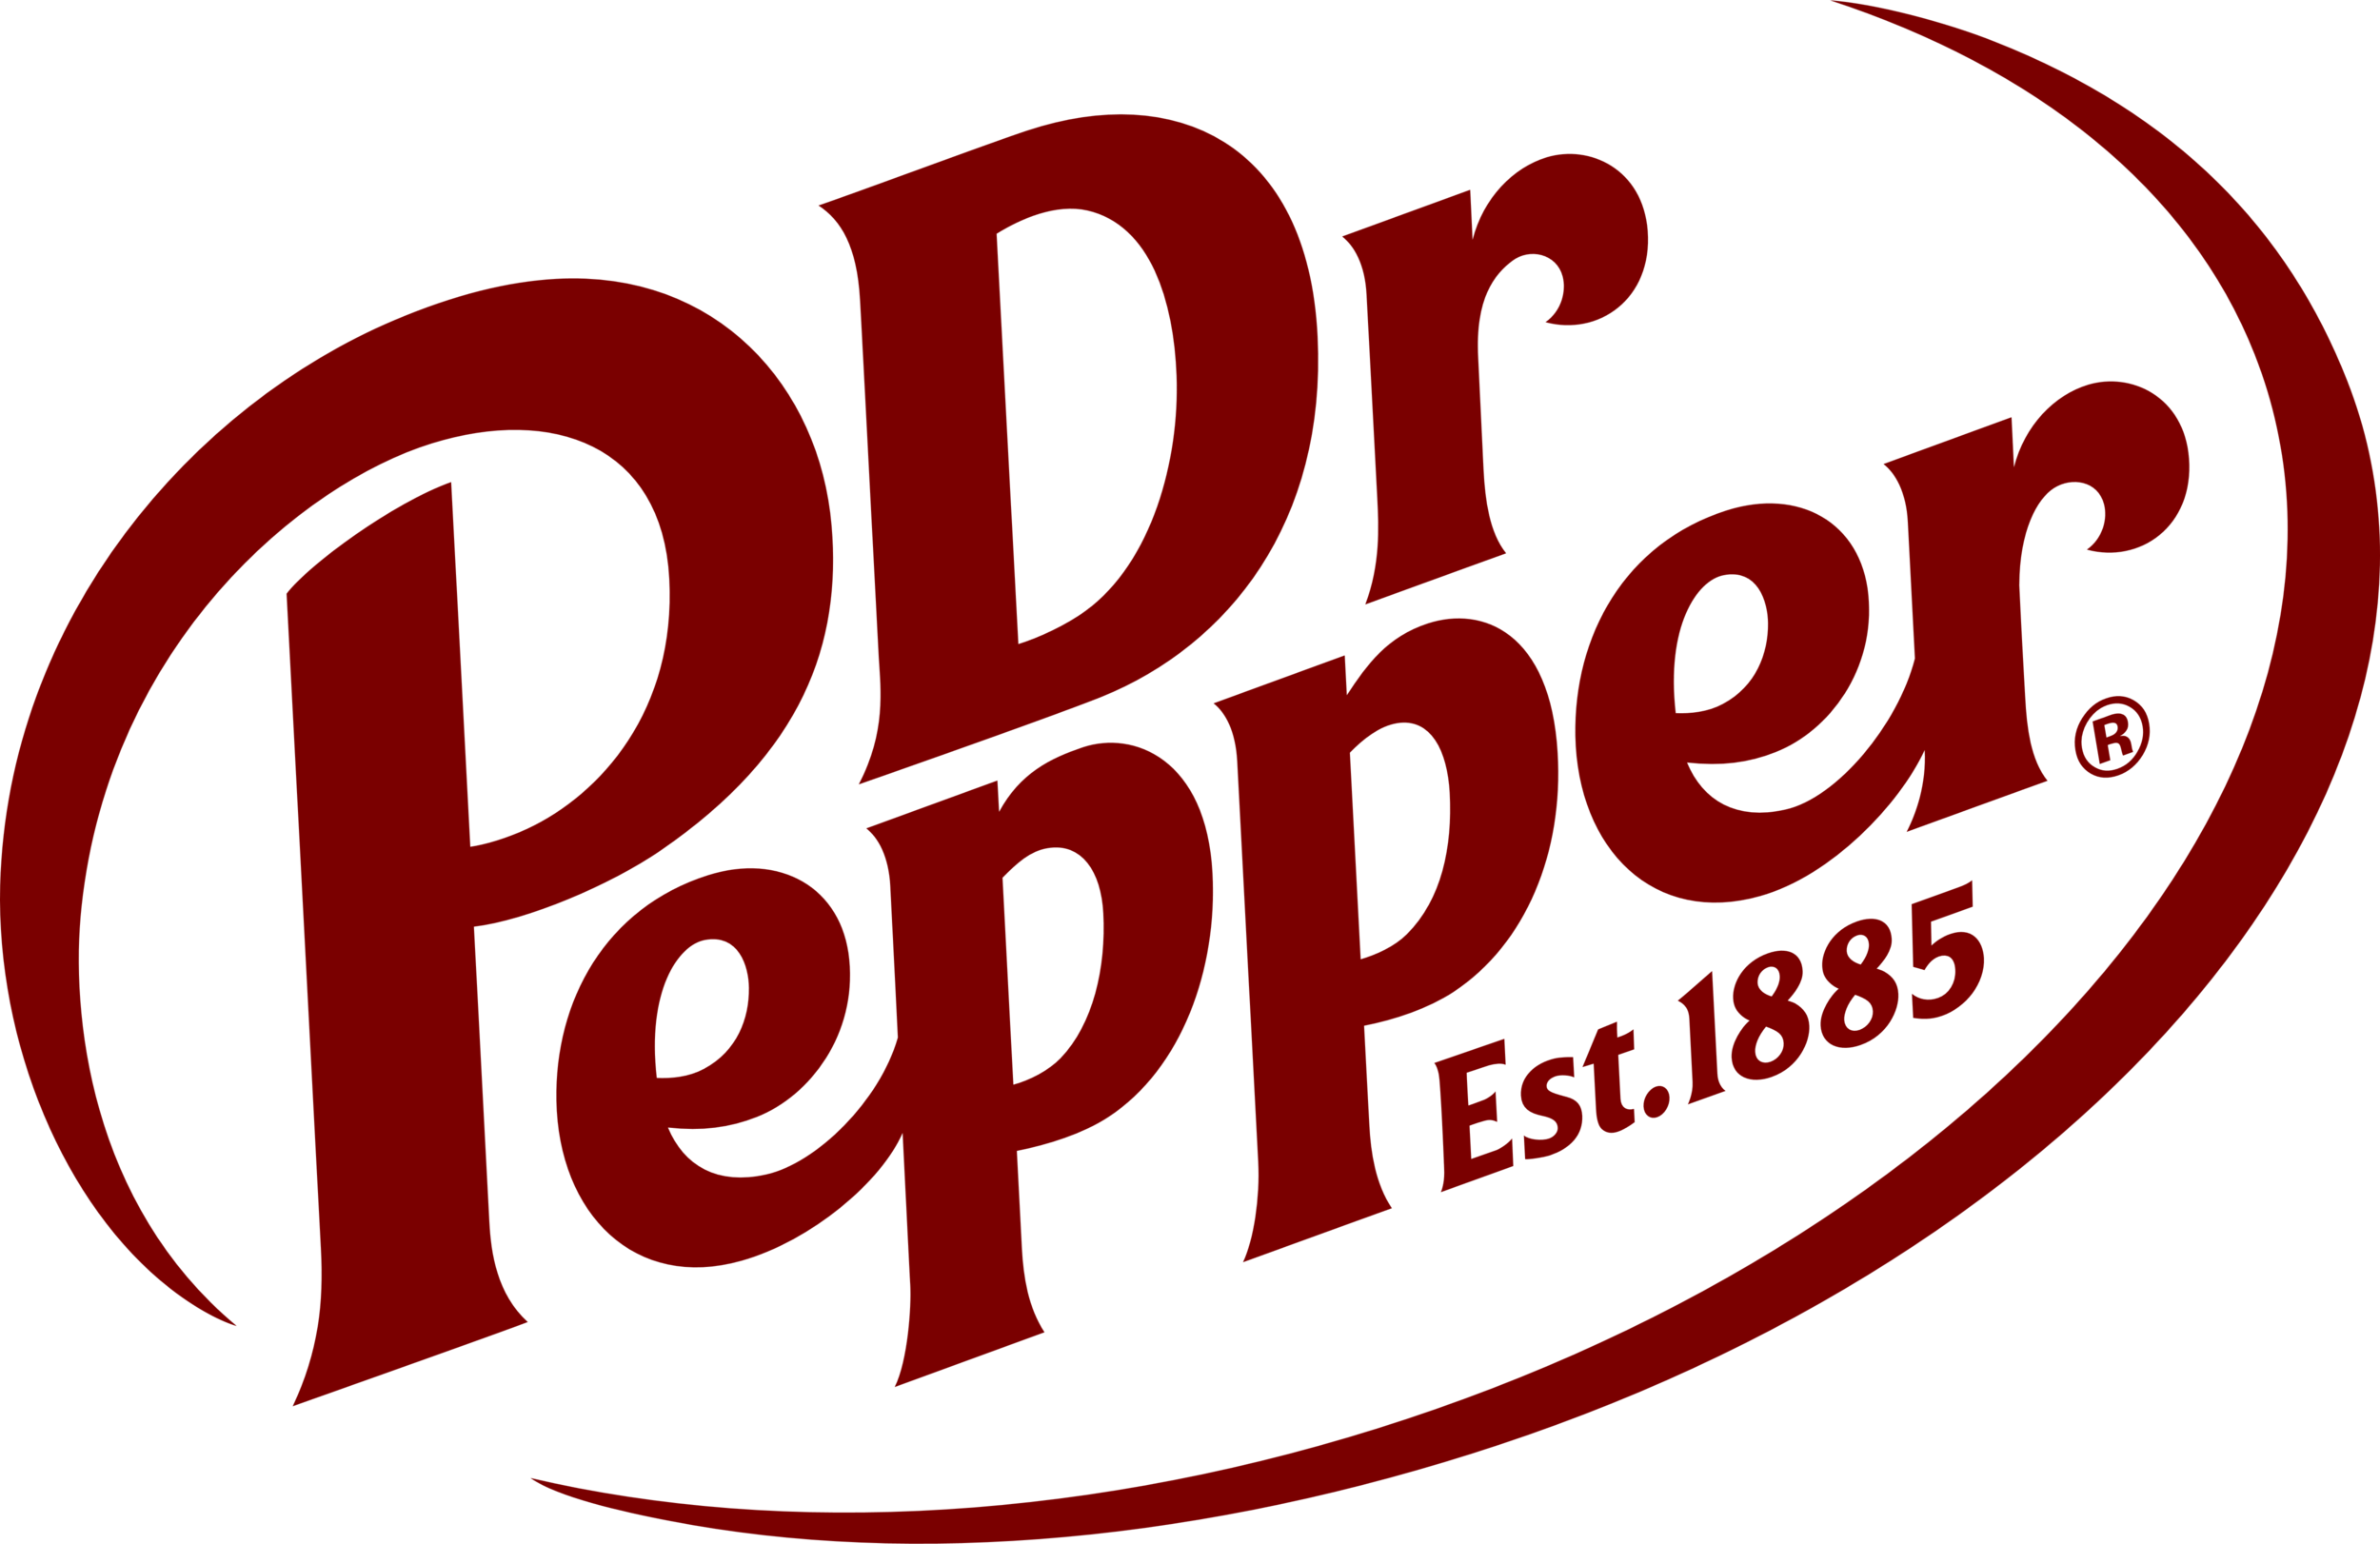 kisspng-dr-pepper-fizzy-drinks-a-w-root-beer-logo-peppers-5ad194a7b0b3b0.9173261015236845197238.png